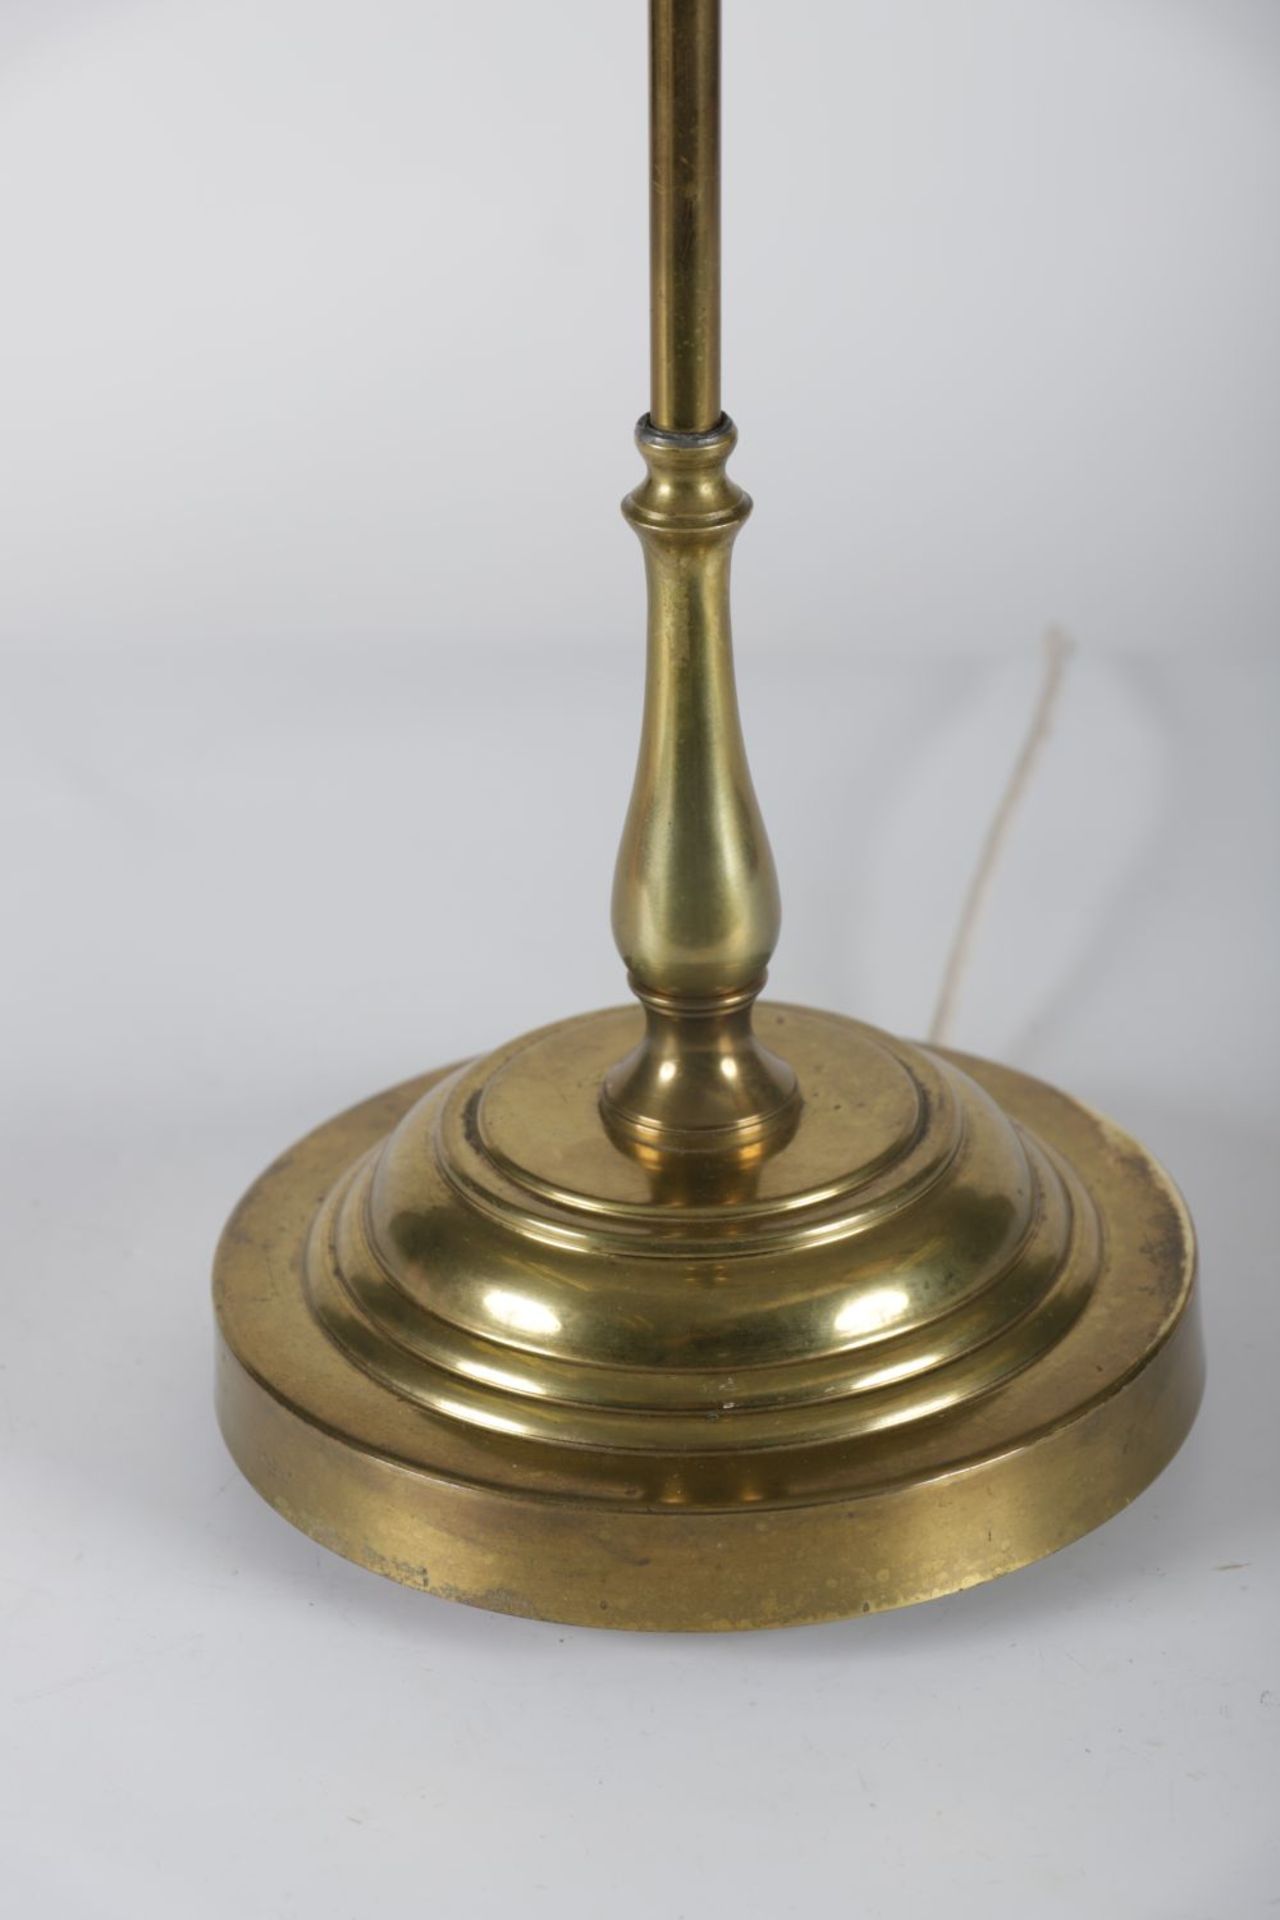 19TH-CENTURY BRASS TABLE LAMP - Image 3 of 3